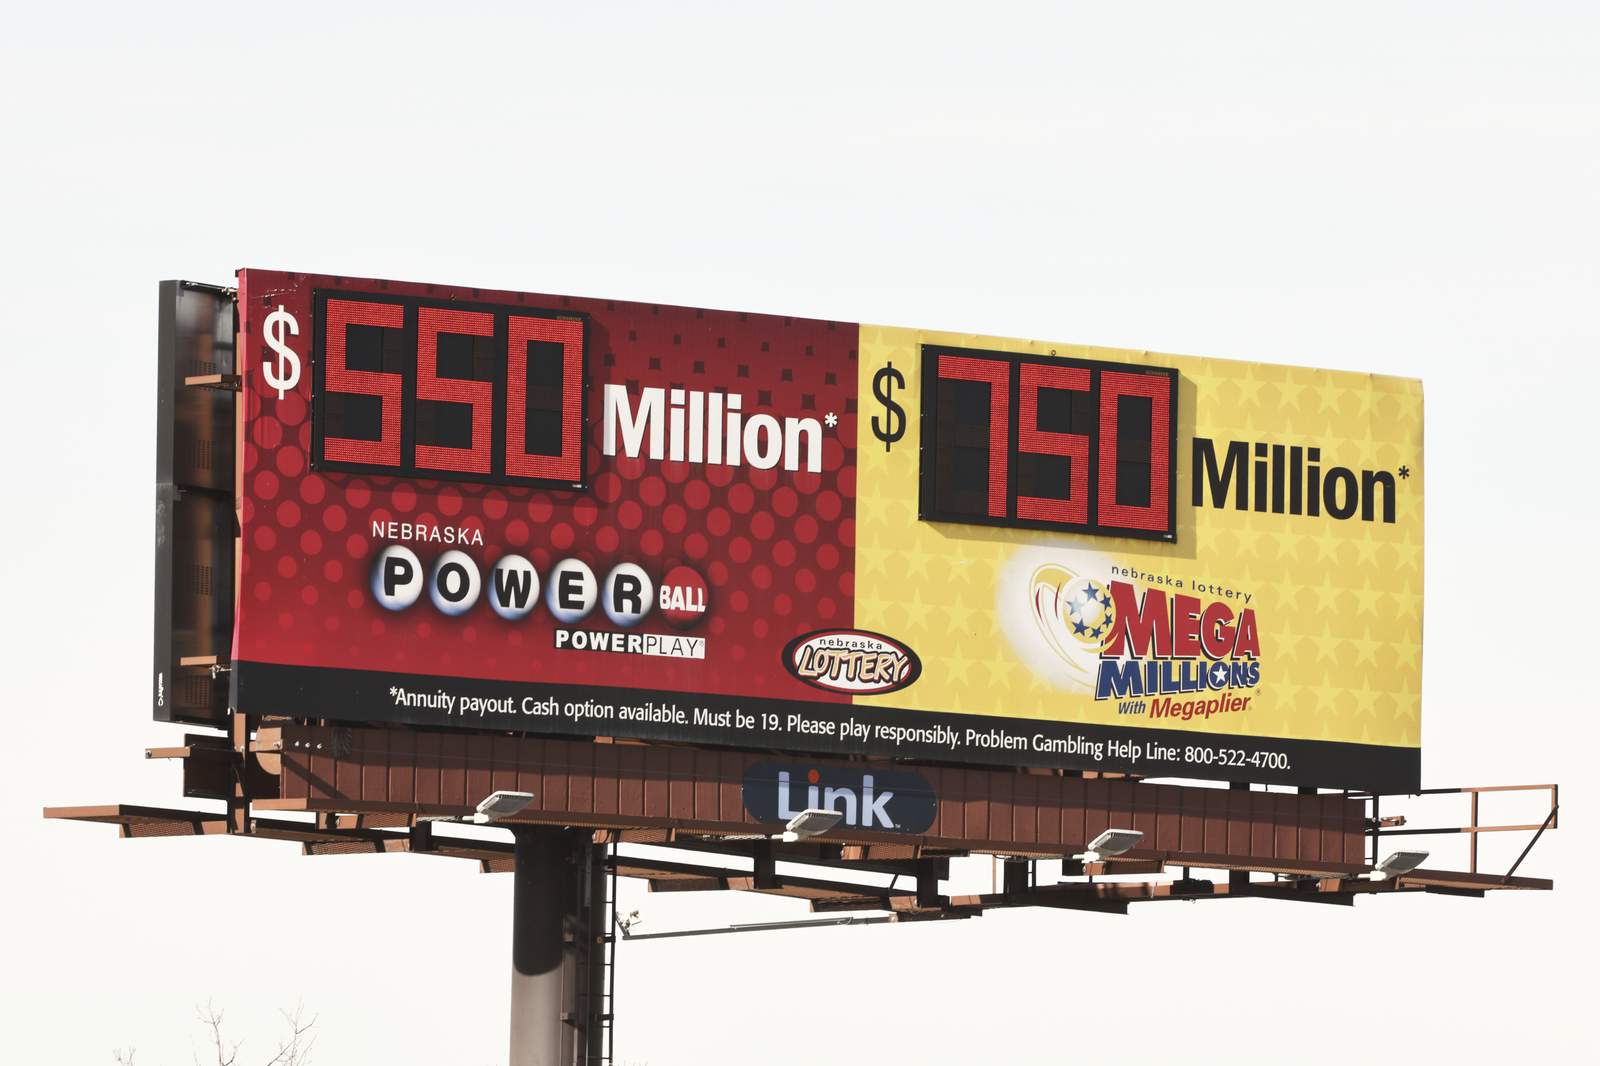 Check your tickets: Powerball jackpot hits $550M. Here are the winning numbers